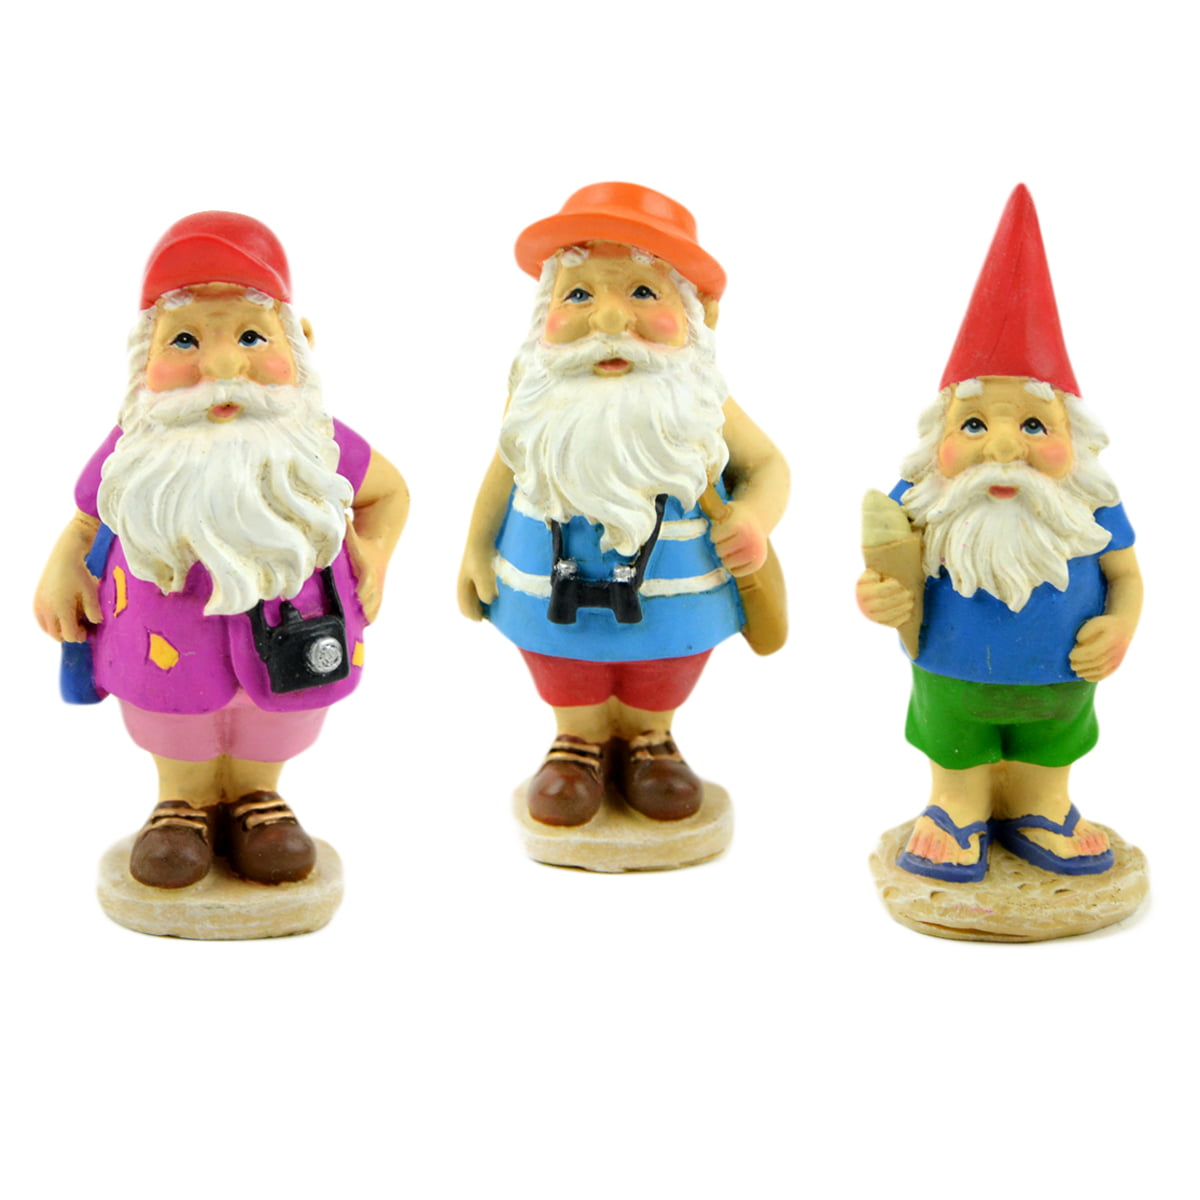 Assortment of Gnomes Touch of Nature Gnome Assortments 3 pc Small Gnomes Miniature Gnomes 3.5 Gnomes Garden Gnomes 2 Standard Garden Gnomes 